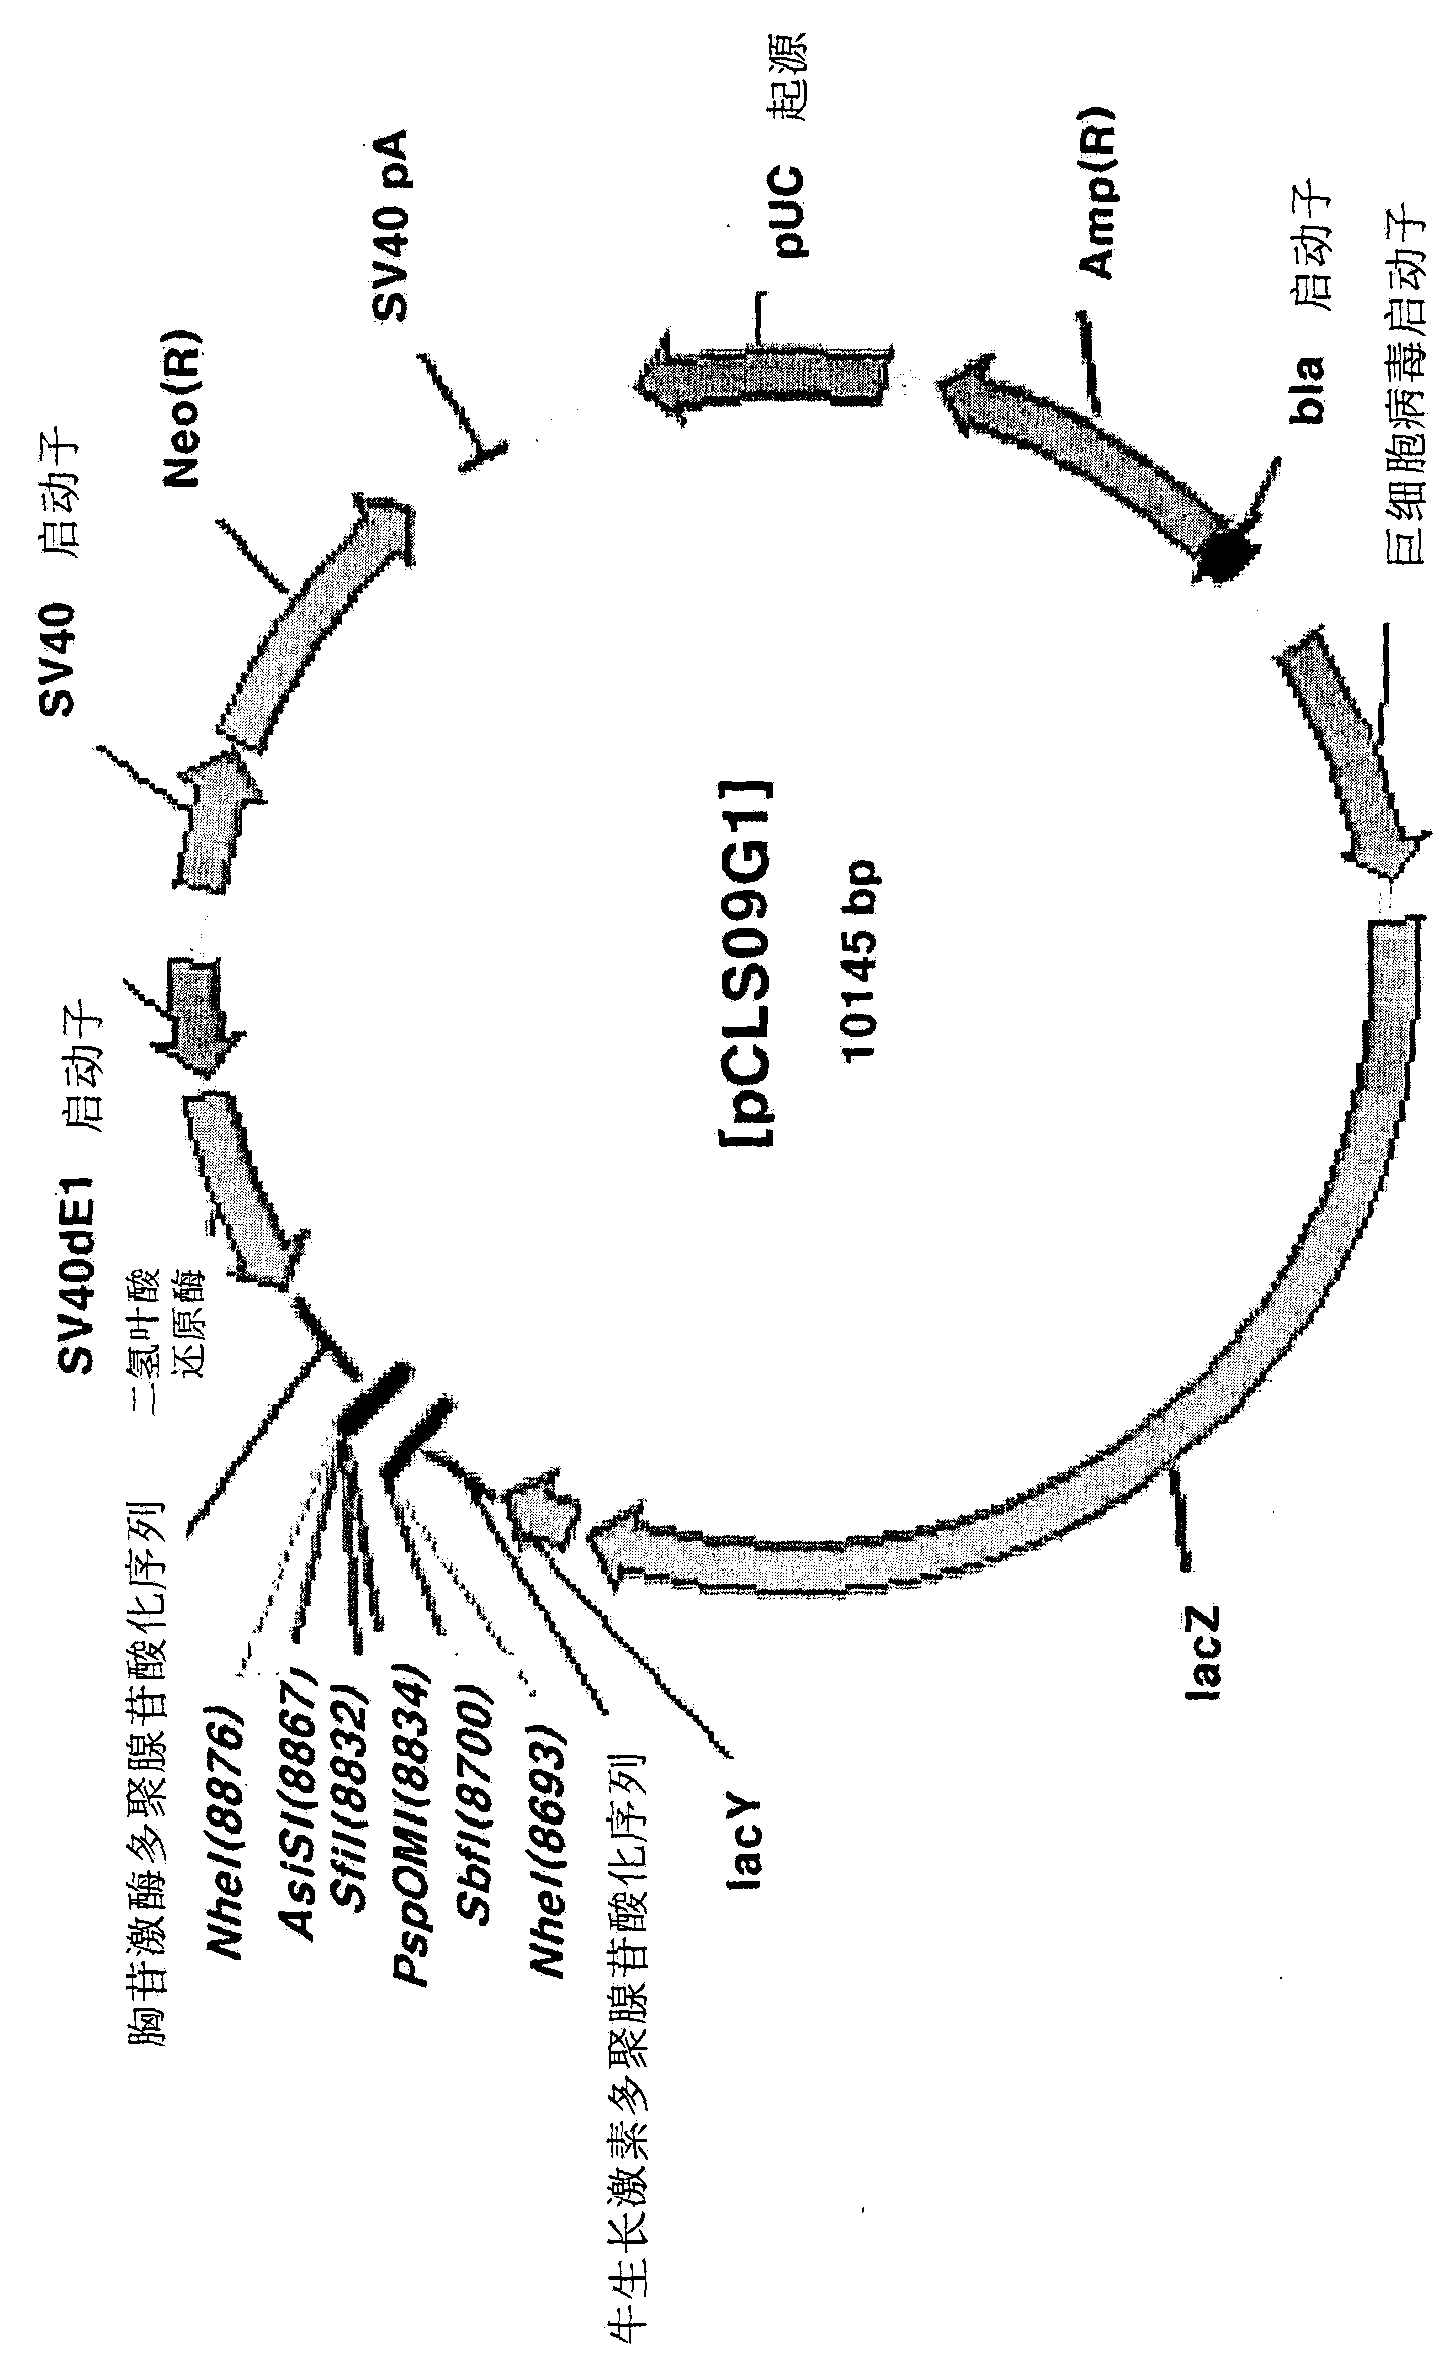 Expression vector for animal cells including csp-b 5'-sar factor and method for producing recombinant proteins using same